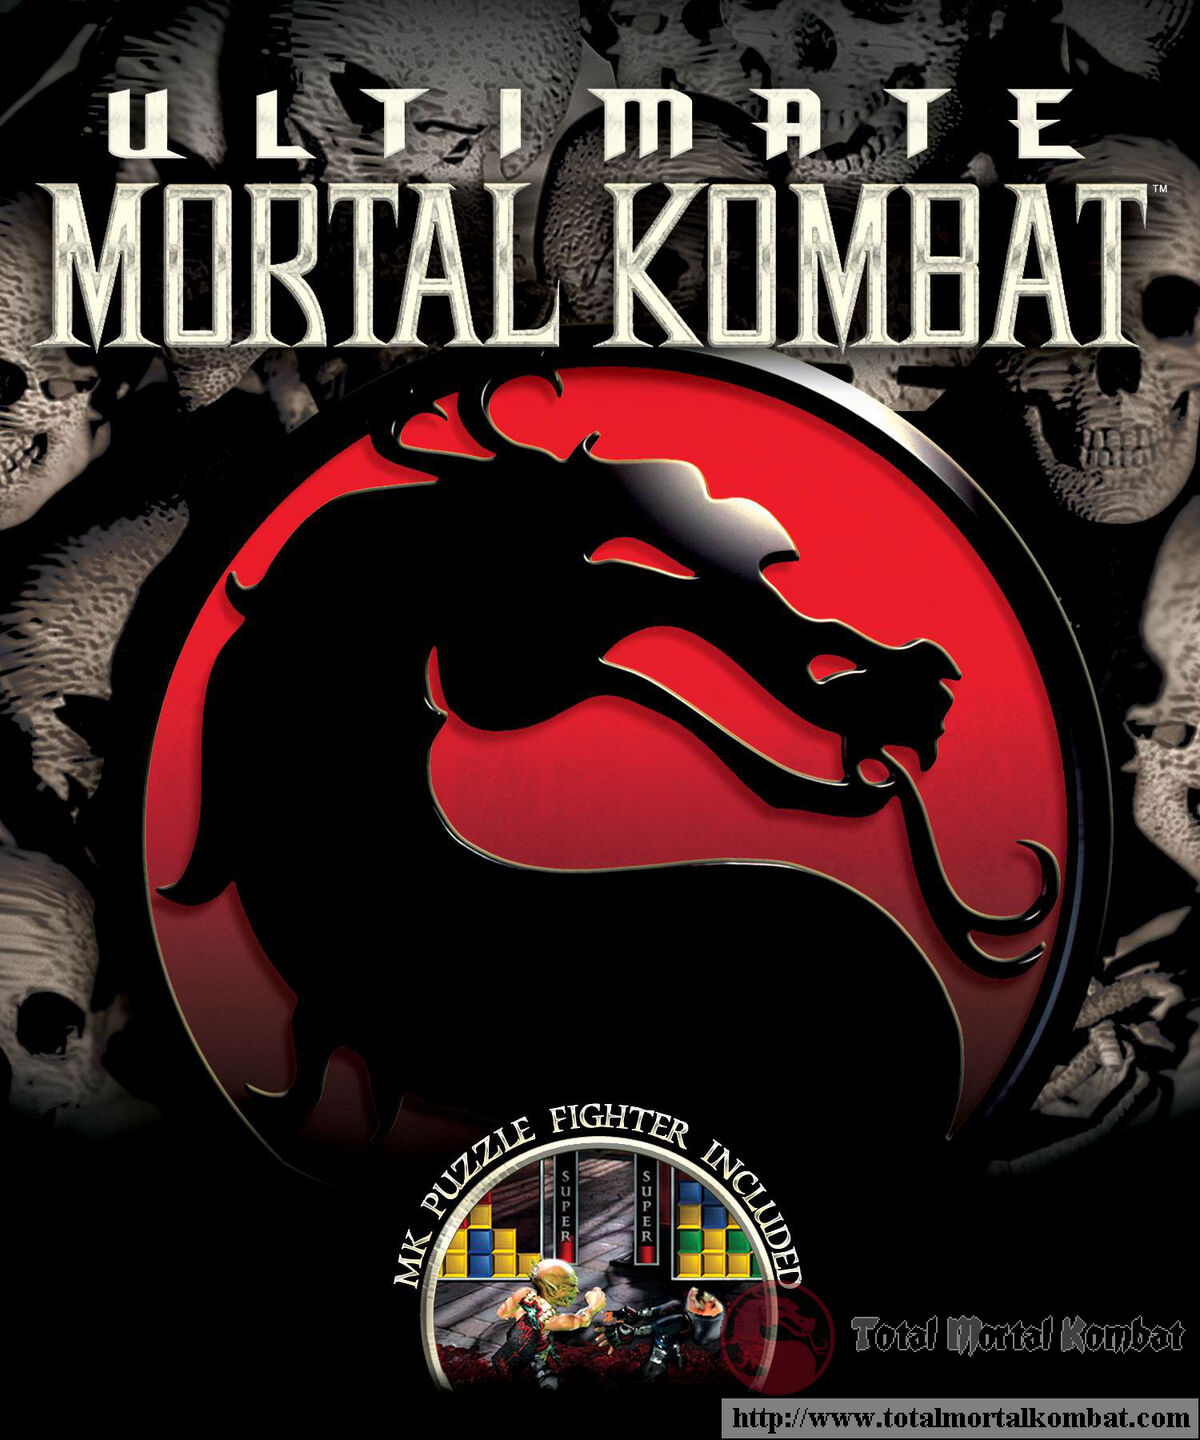 Mortal Kombat 3: A definitive player ranking, 20 years later